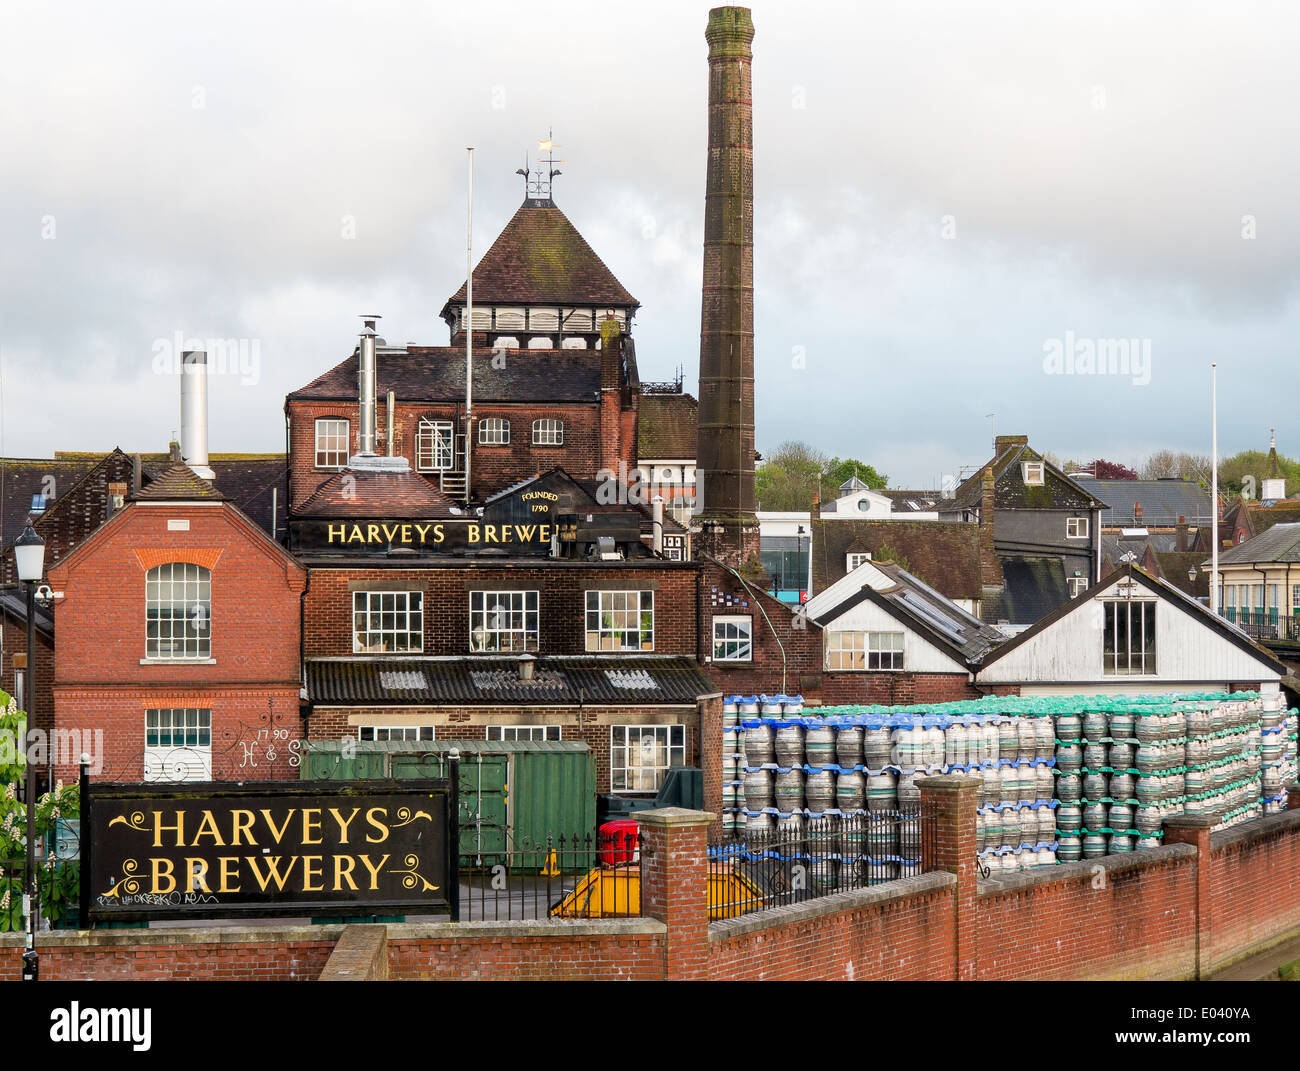 The Harveys Brewery in Lewes, East Sussex; brewer of traditional English ales Stock Photo